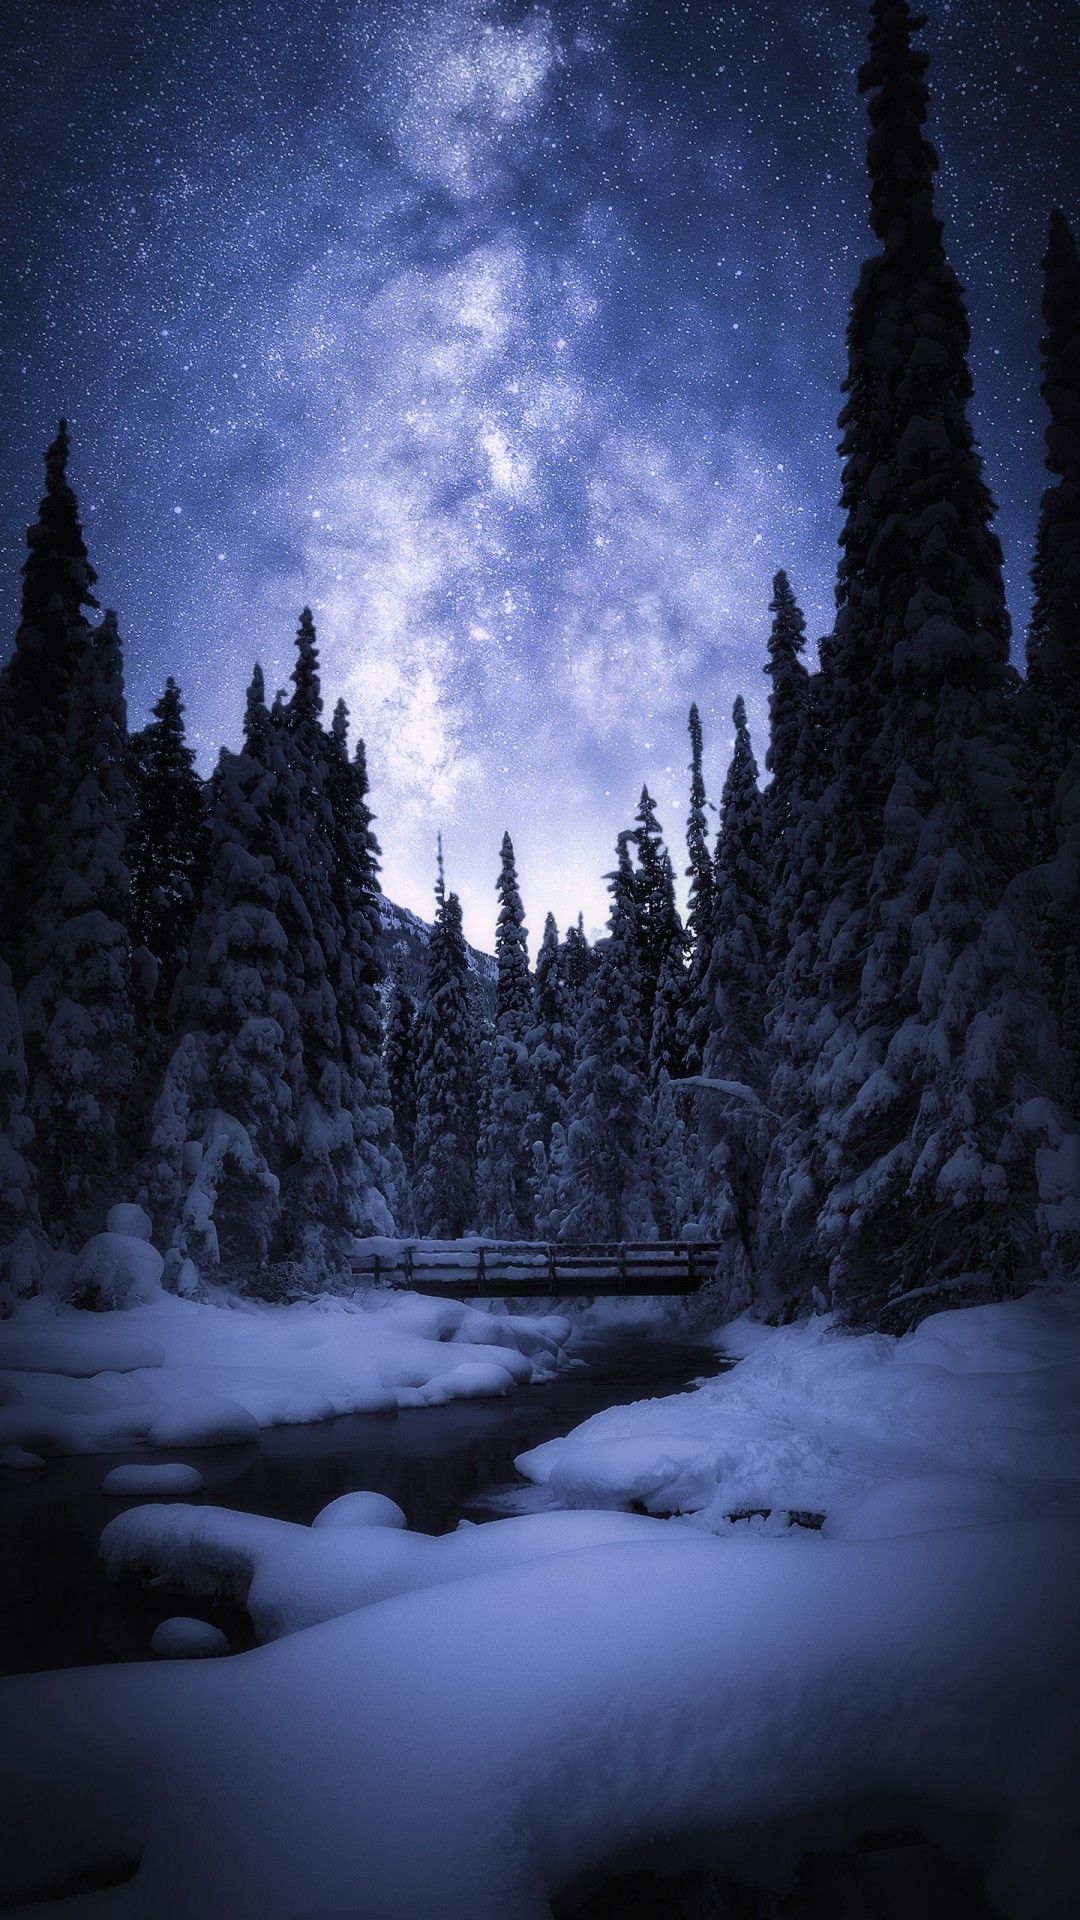 Night Sky Wallpaper Android HEART STREAMAED